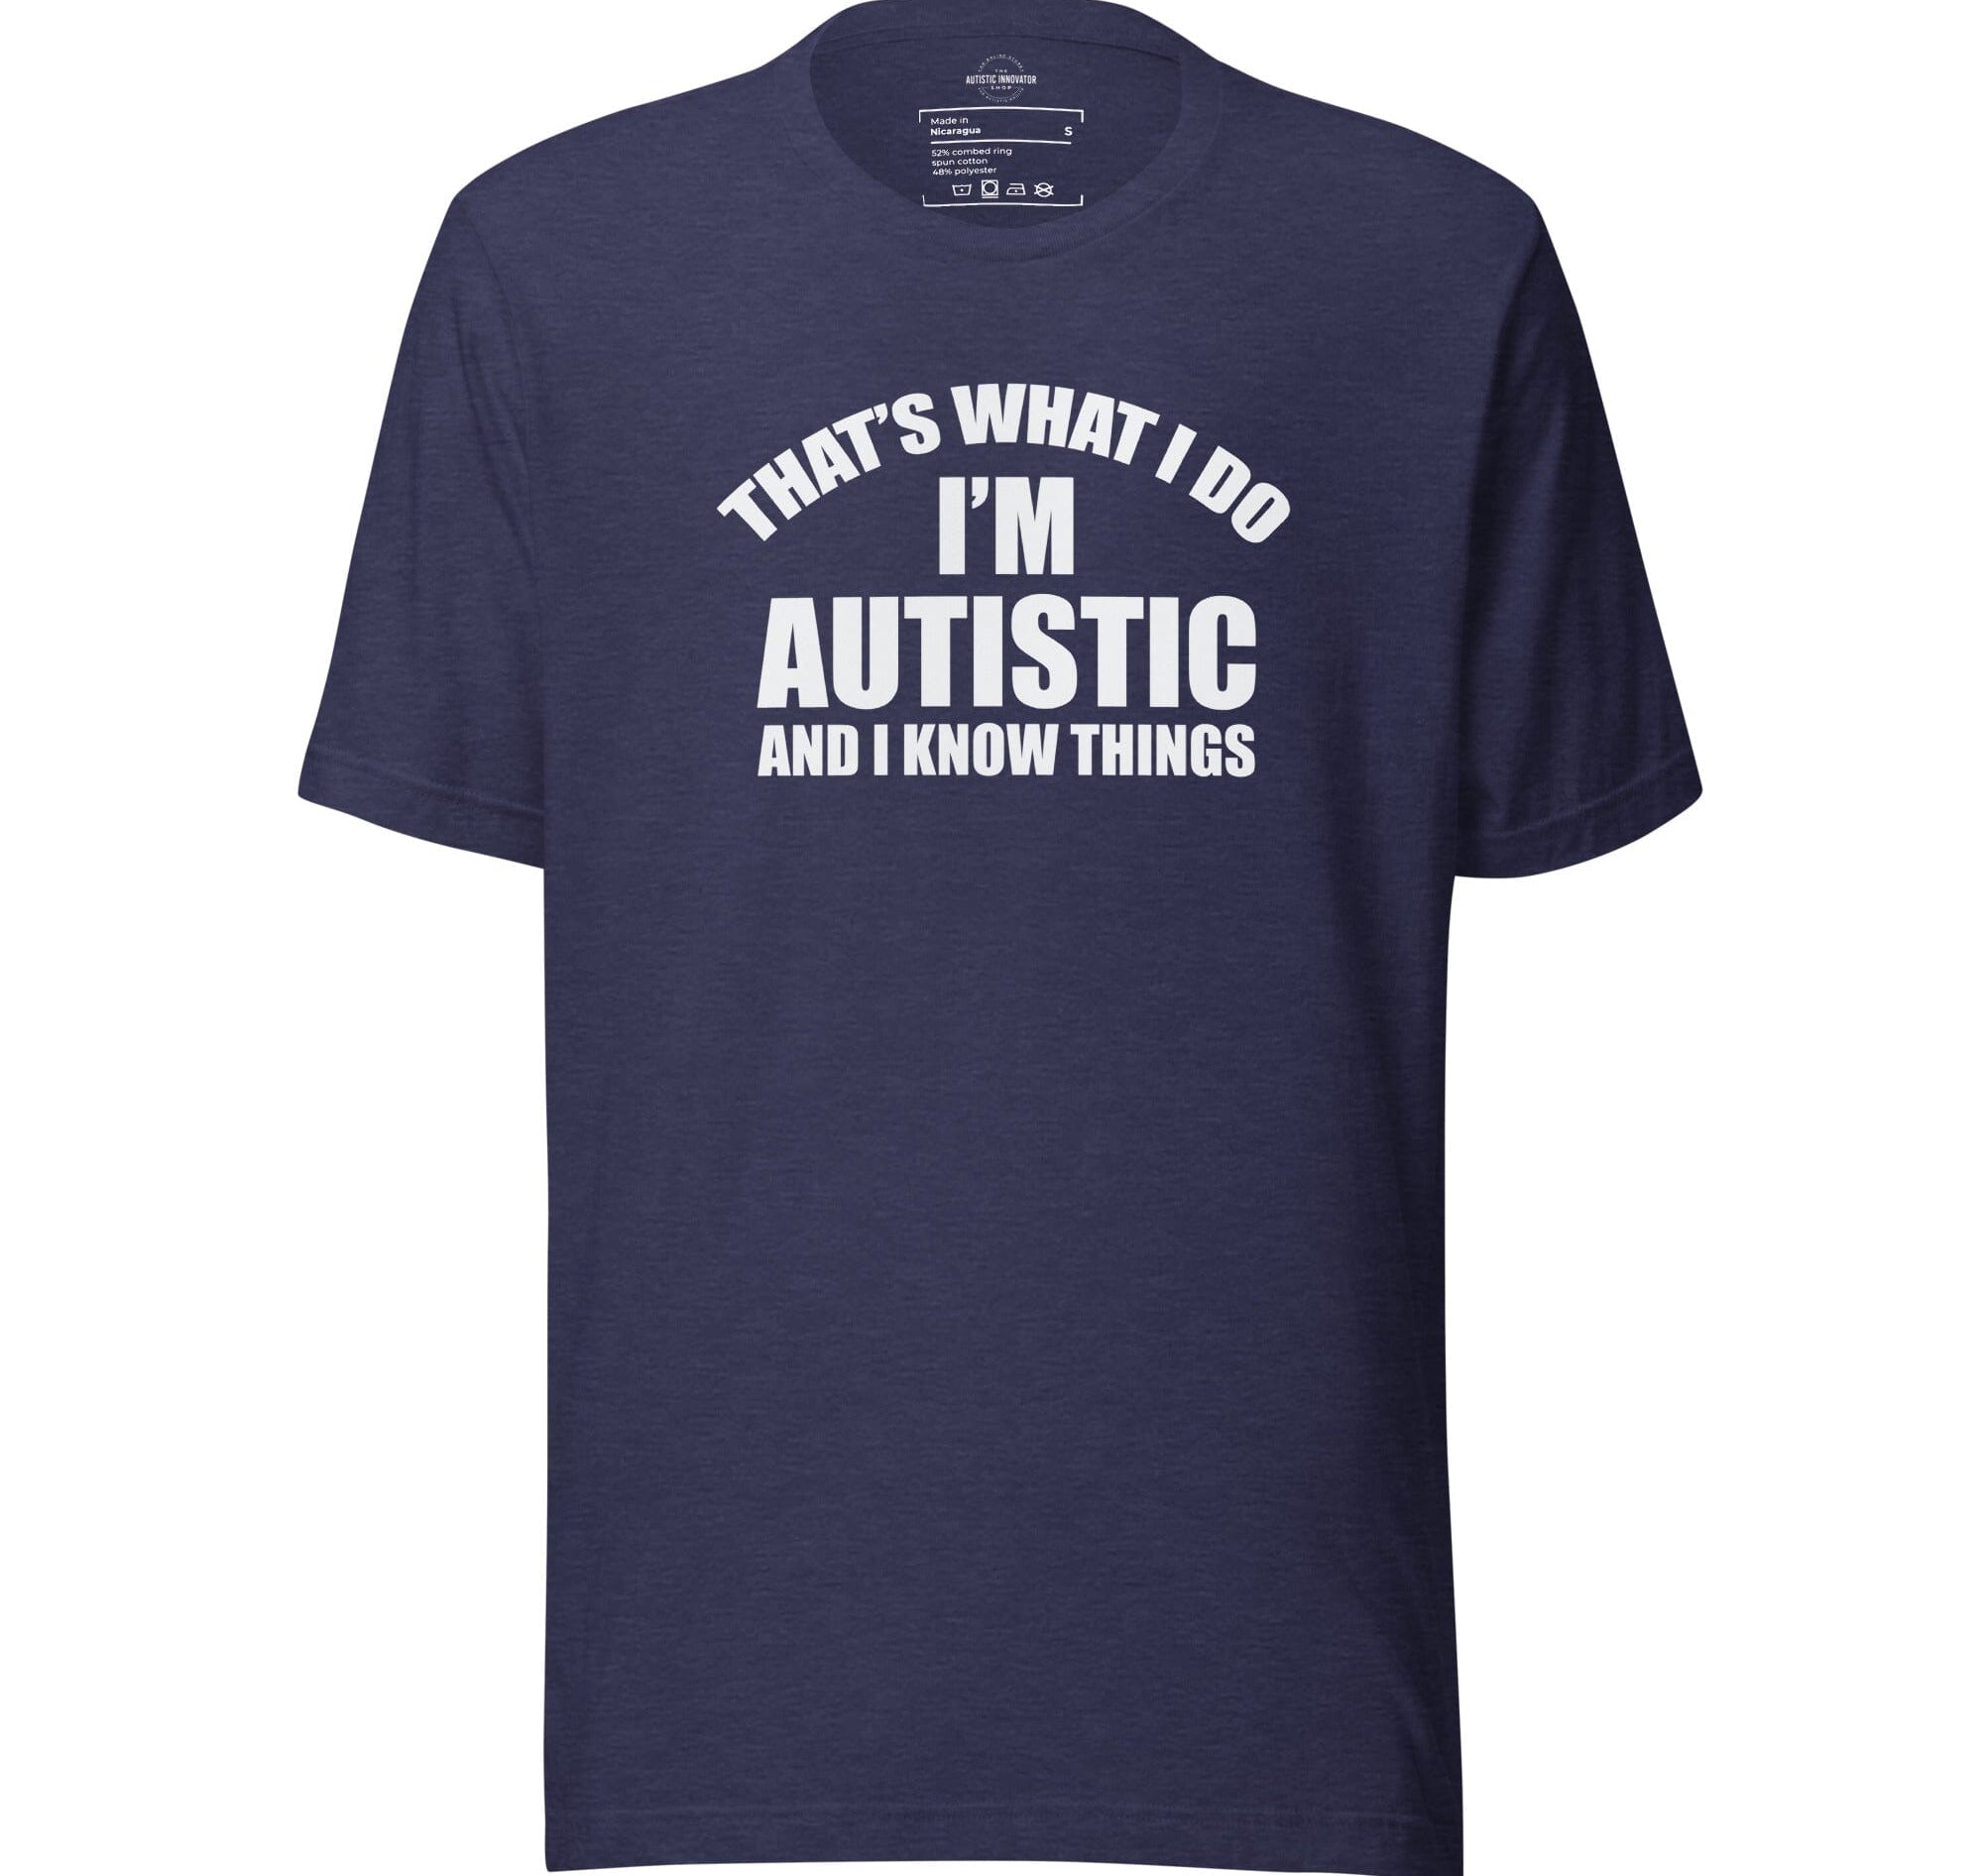 That's What I Do, I'm Autistic and I Know Things Unisex t-shirt The Autistic Innovator Heather Midnight Navy S 